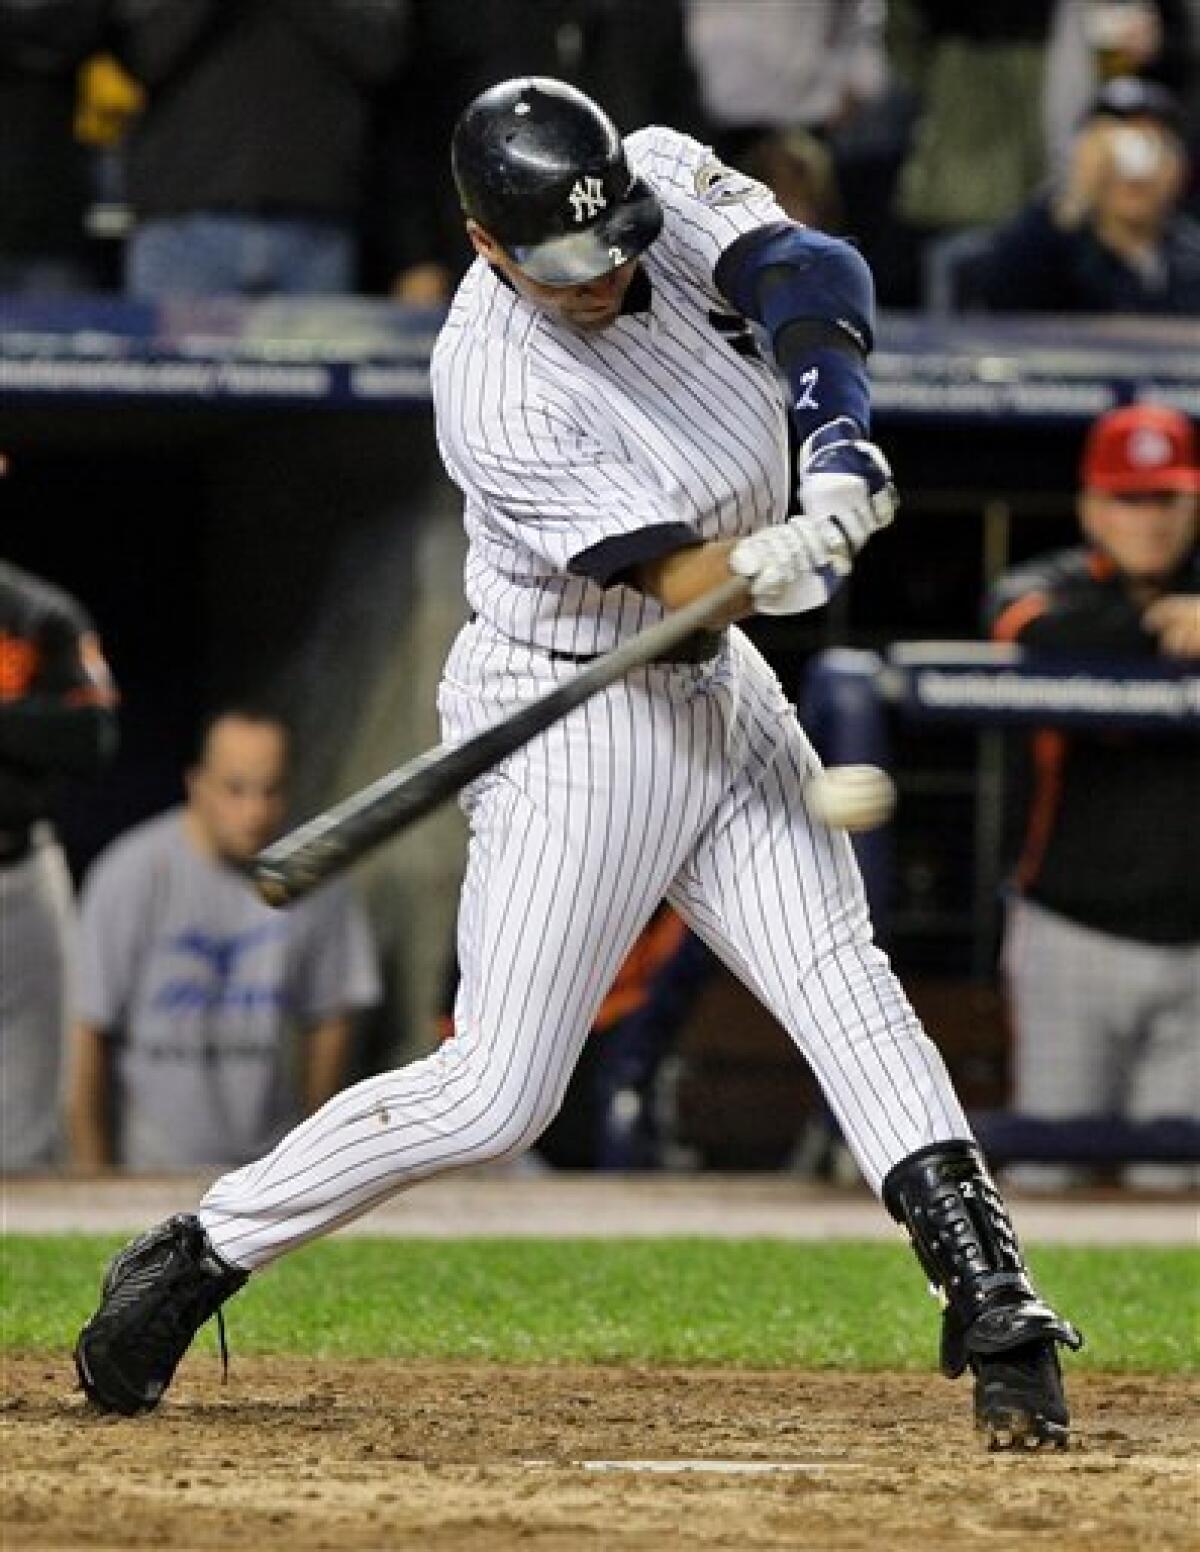 Derek Jeter With Babe Ruth's Swing: Yankees Fans Already